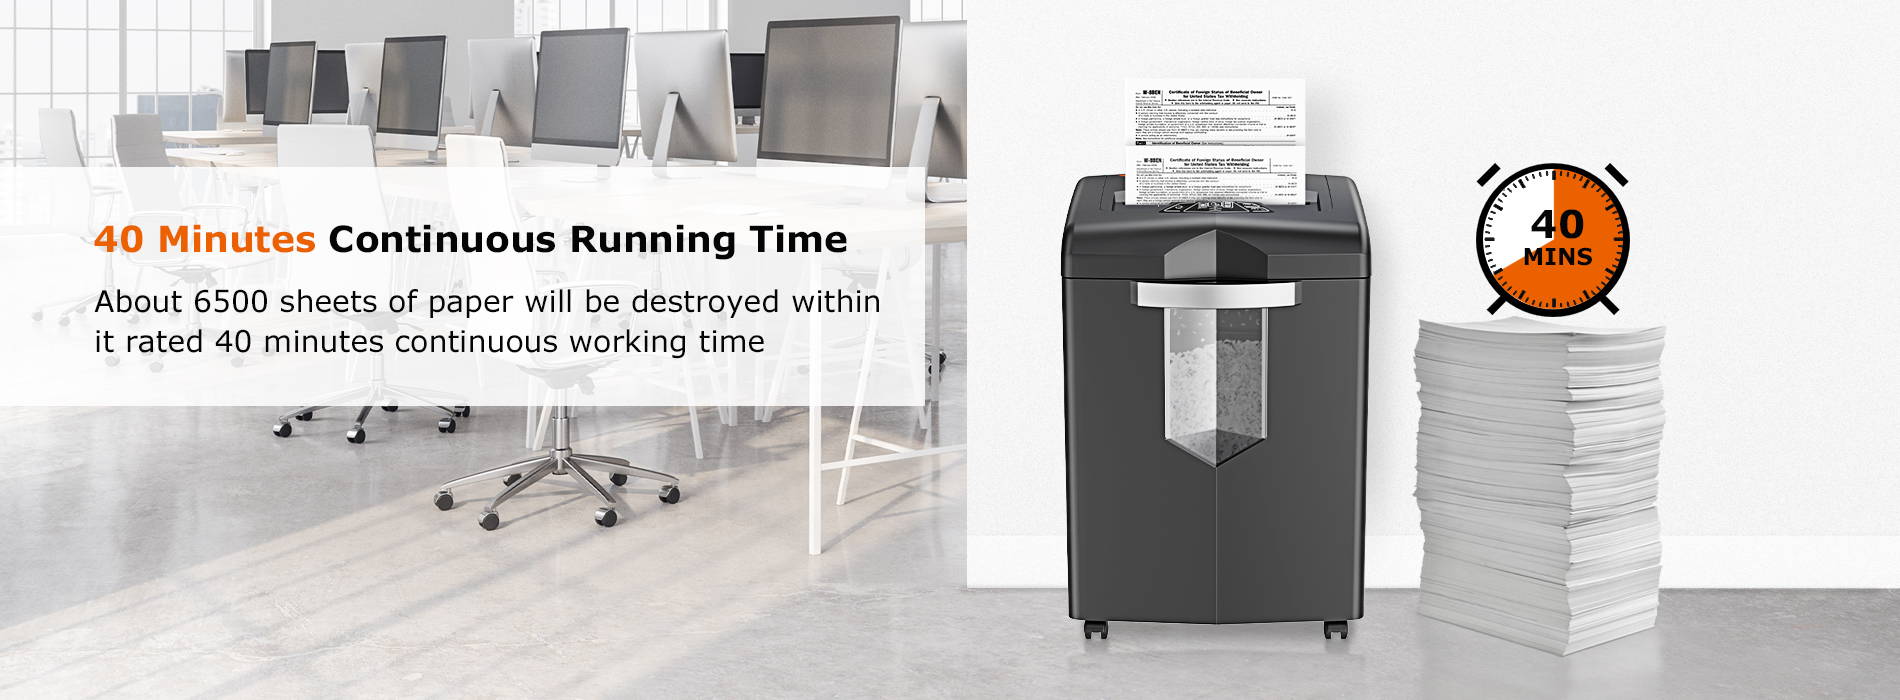 40 Minutes Continuous Running Time  About 6500 sheets of paper will be destroyed within it rated 40 minutes continuous working time